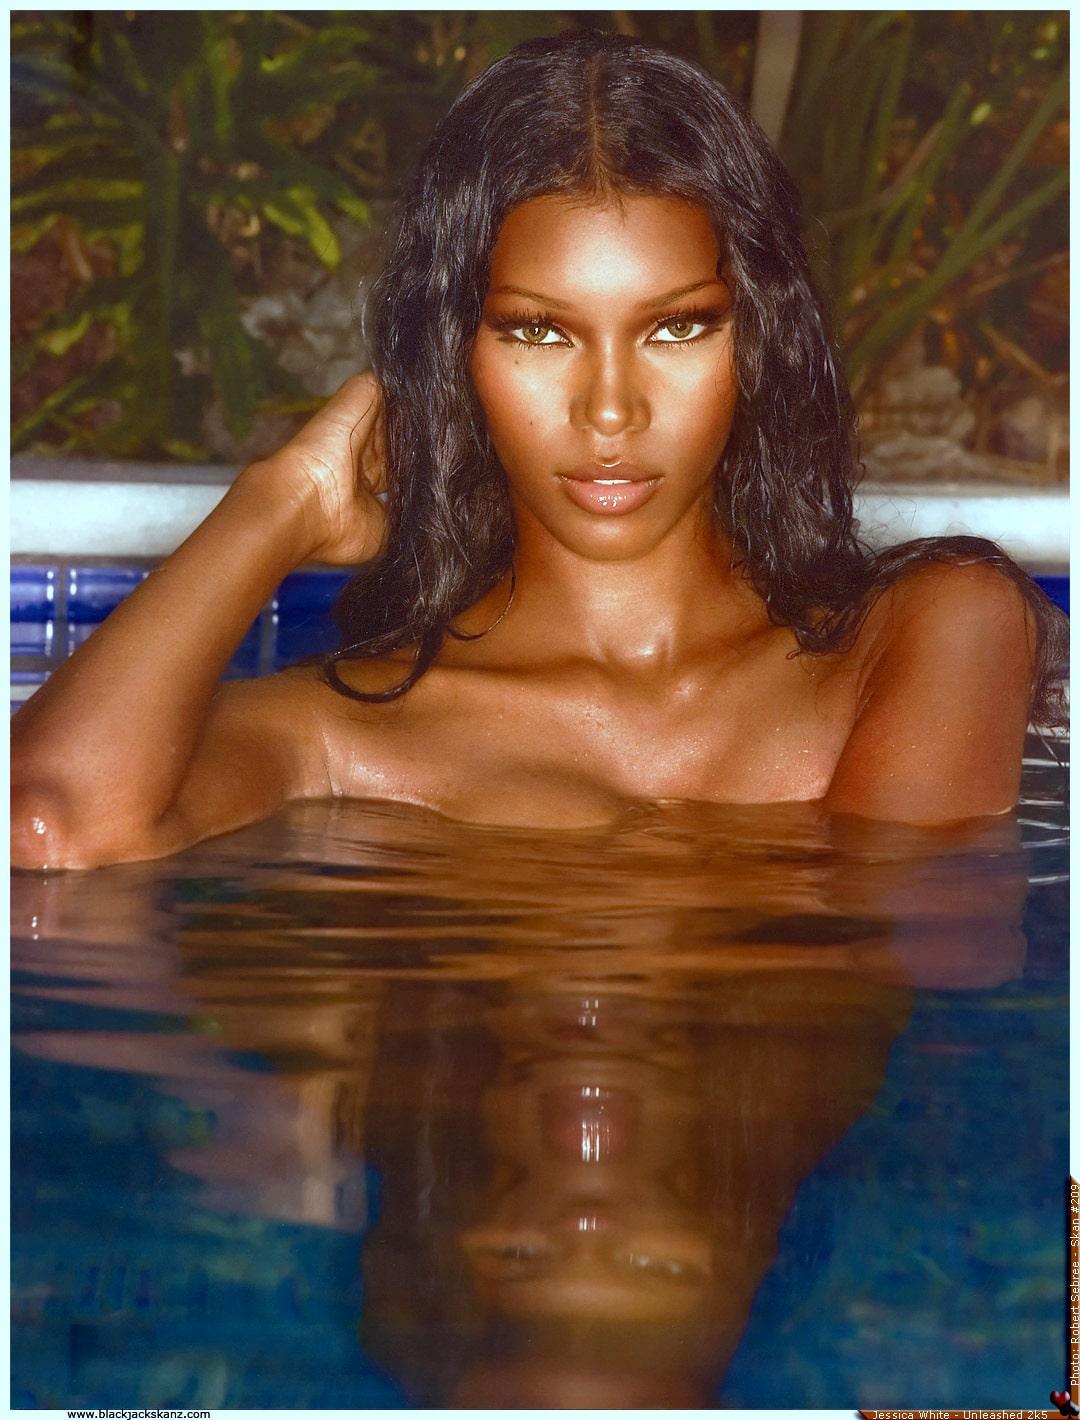 44 Hot And Sexy Pictures Of Jessica White Explores Her Curvy Body | Best Of Comic Books